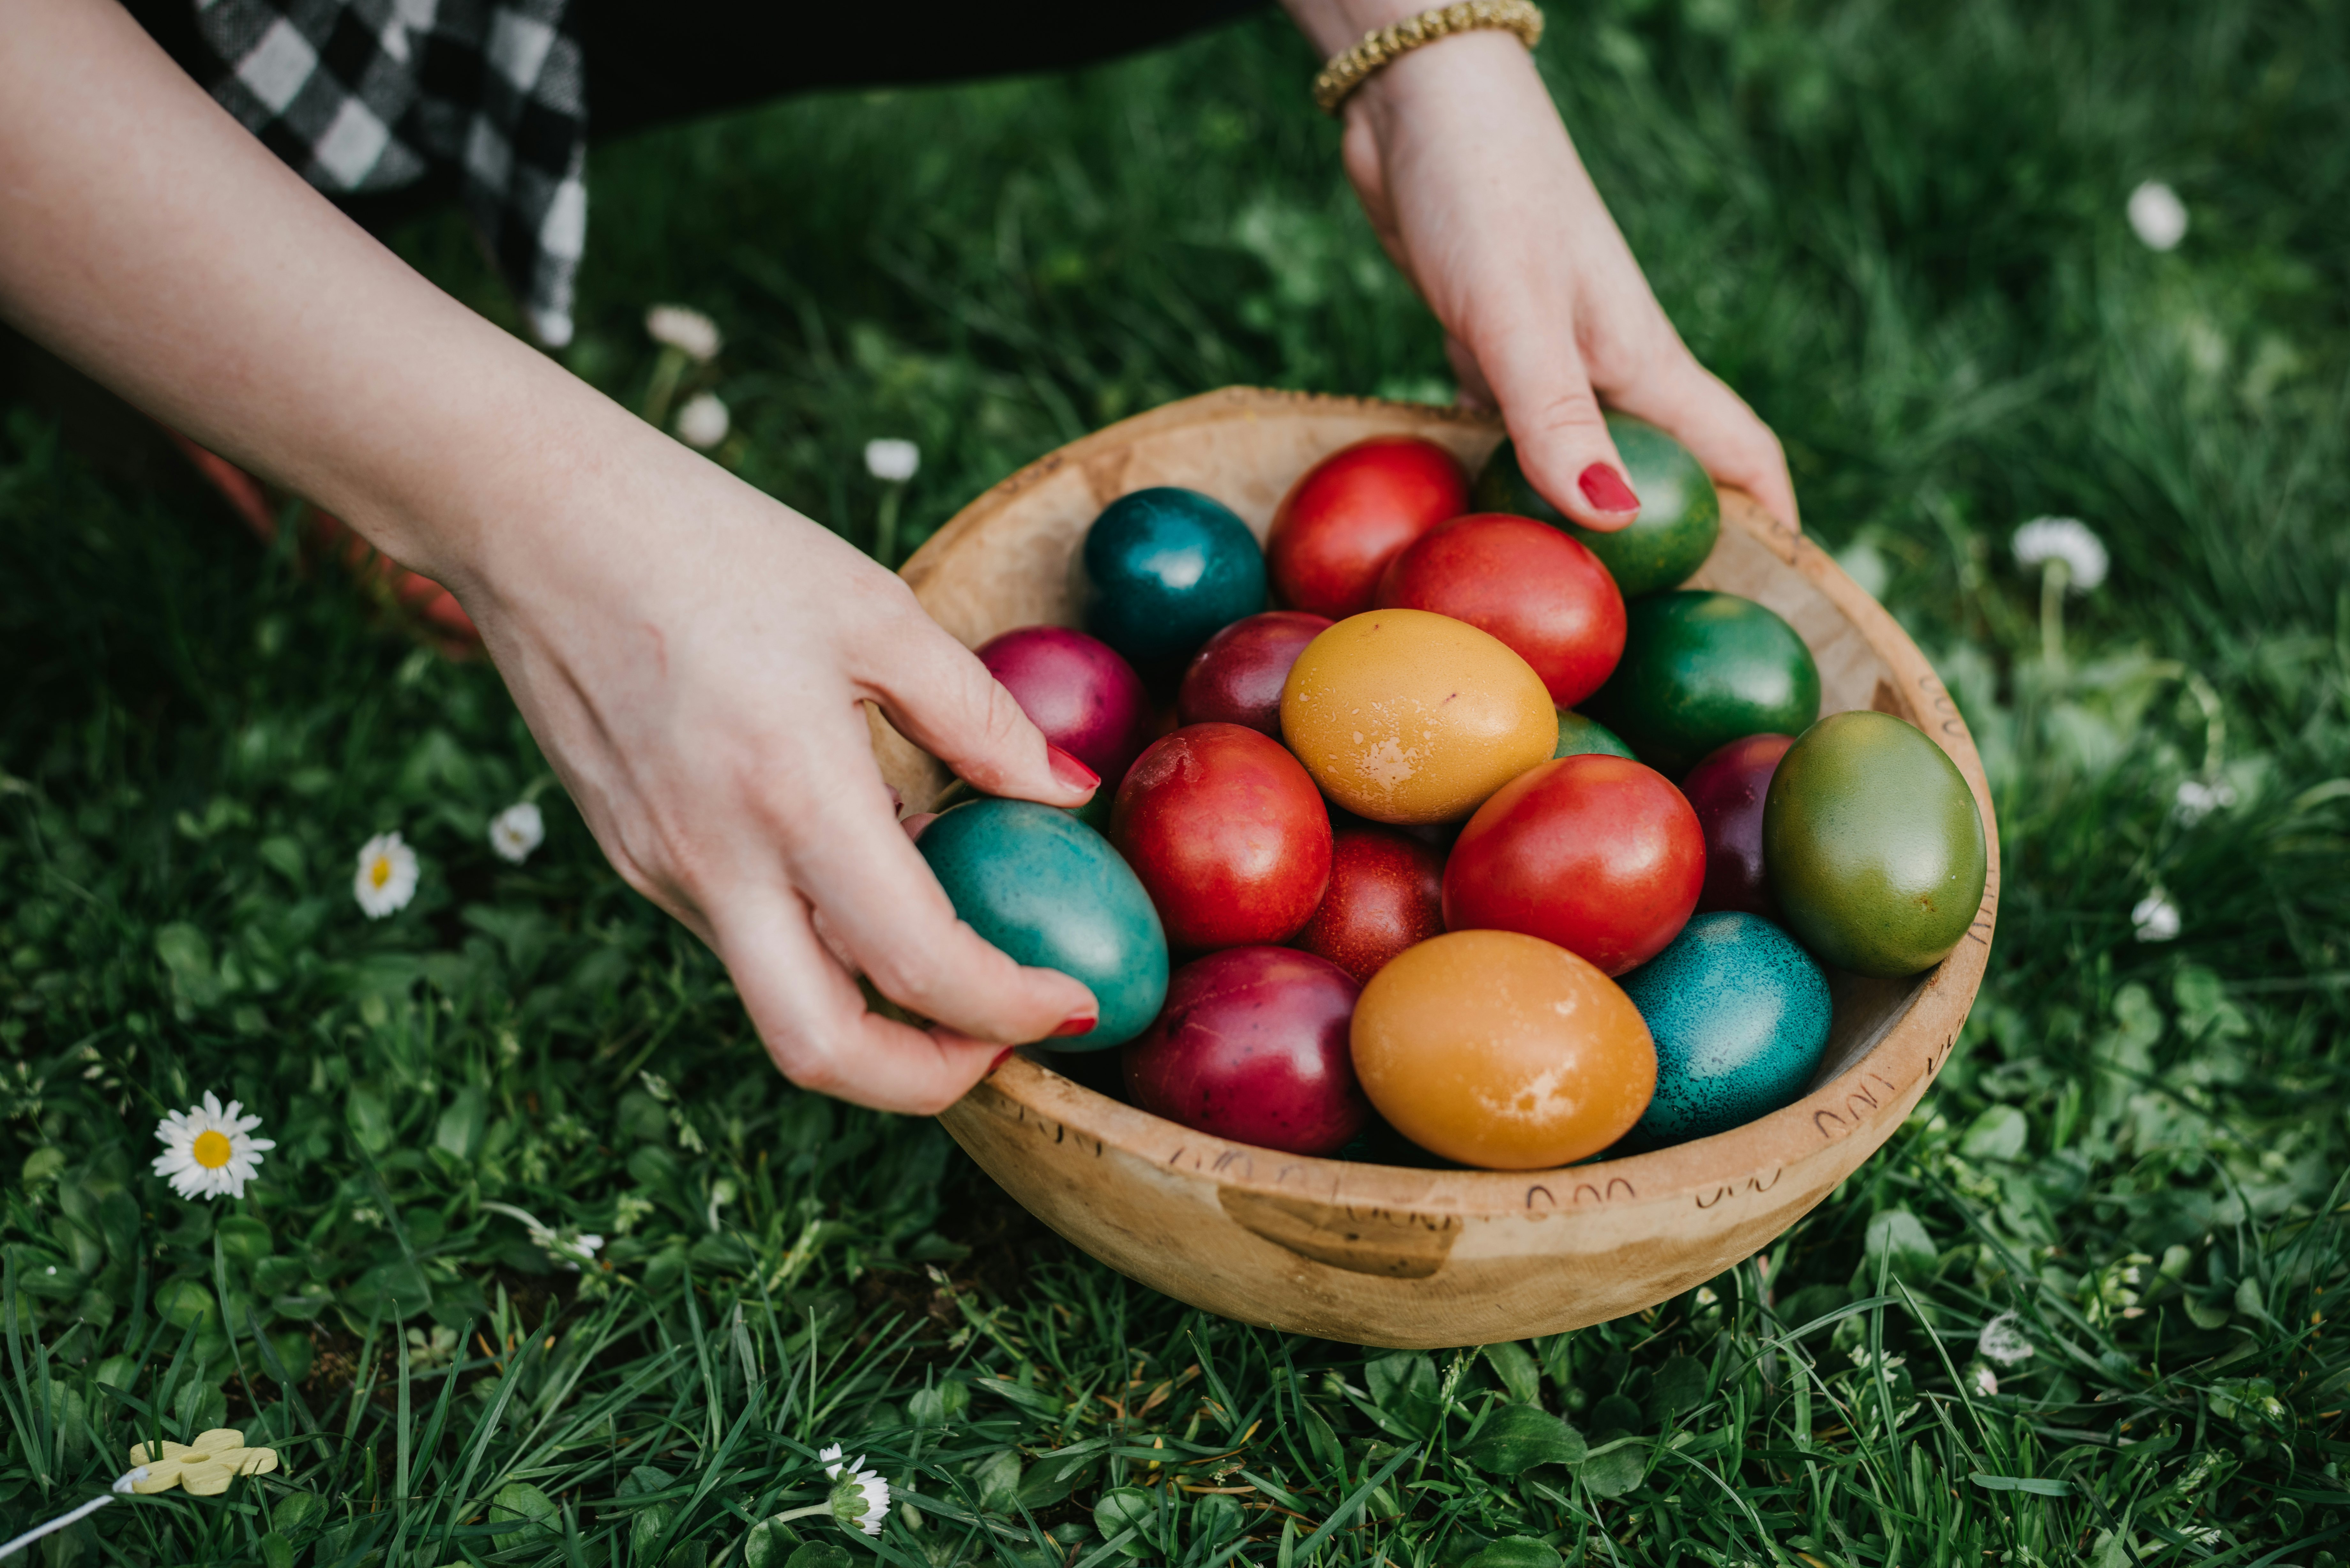 Why Do We Have Easter Egg Hunts? The Tradition Is Centuries-Old